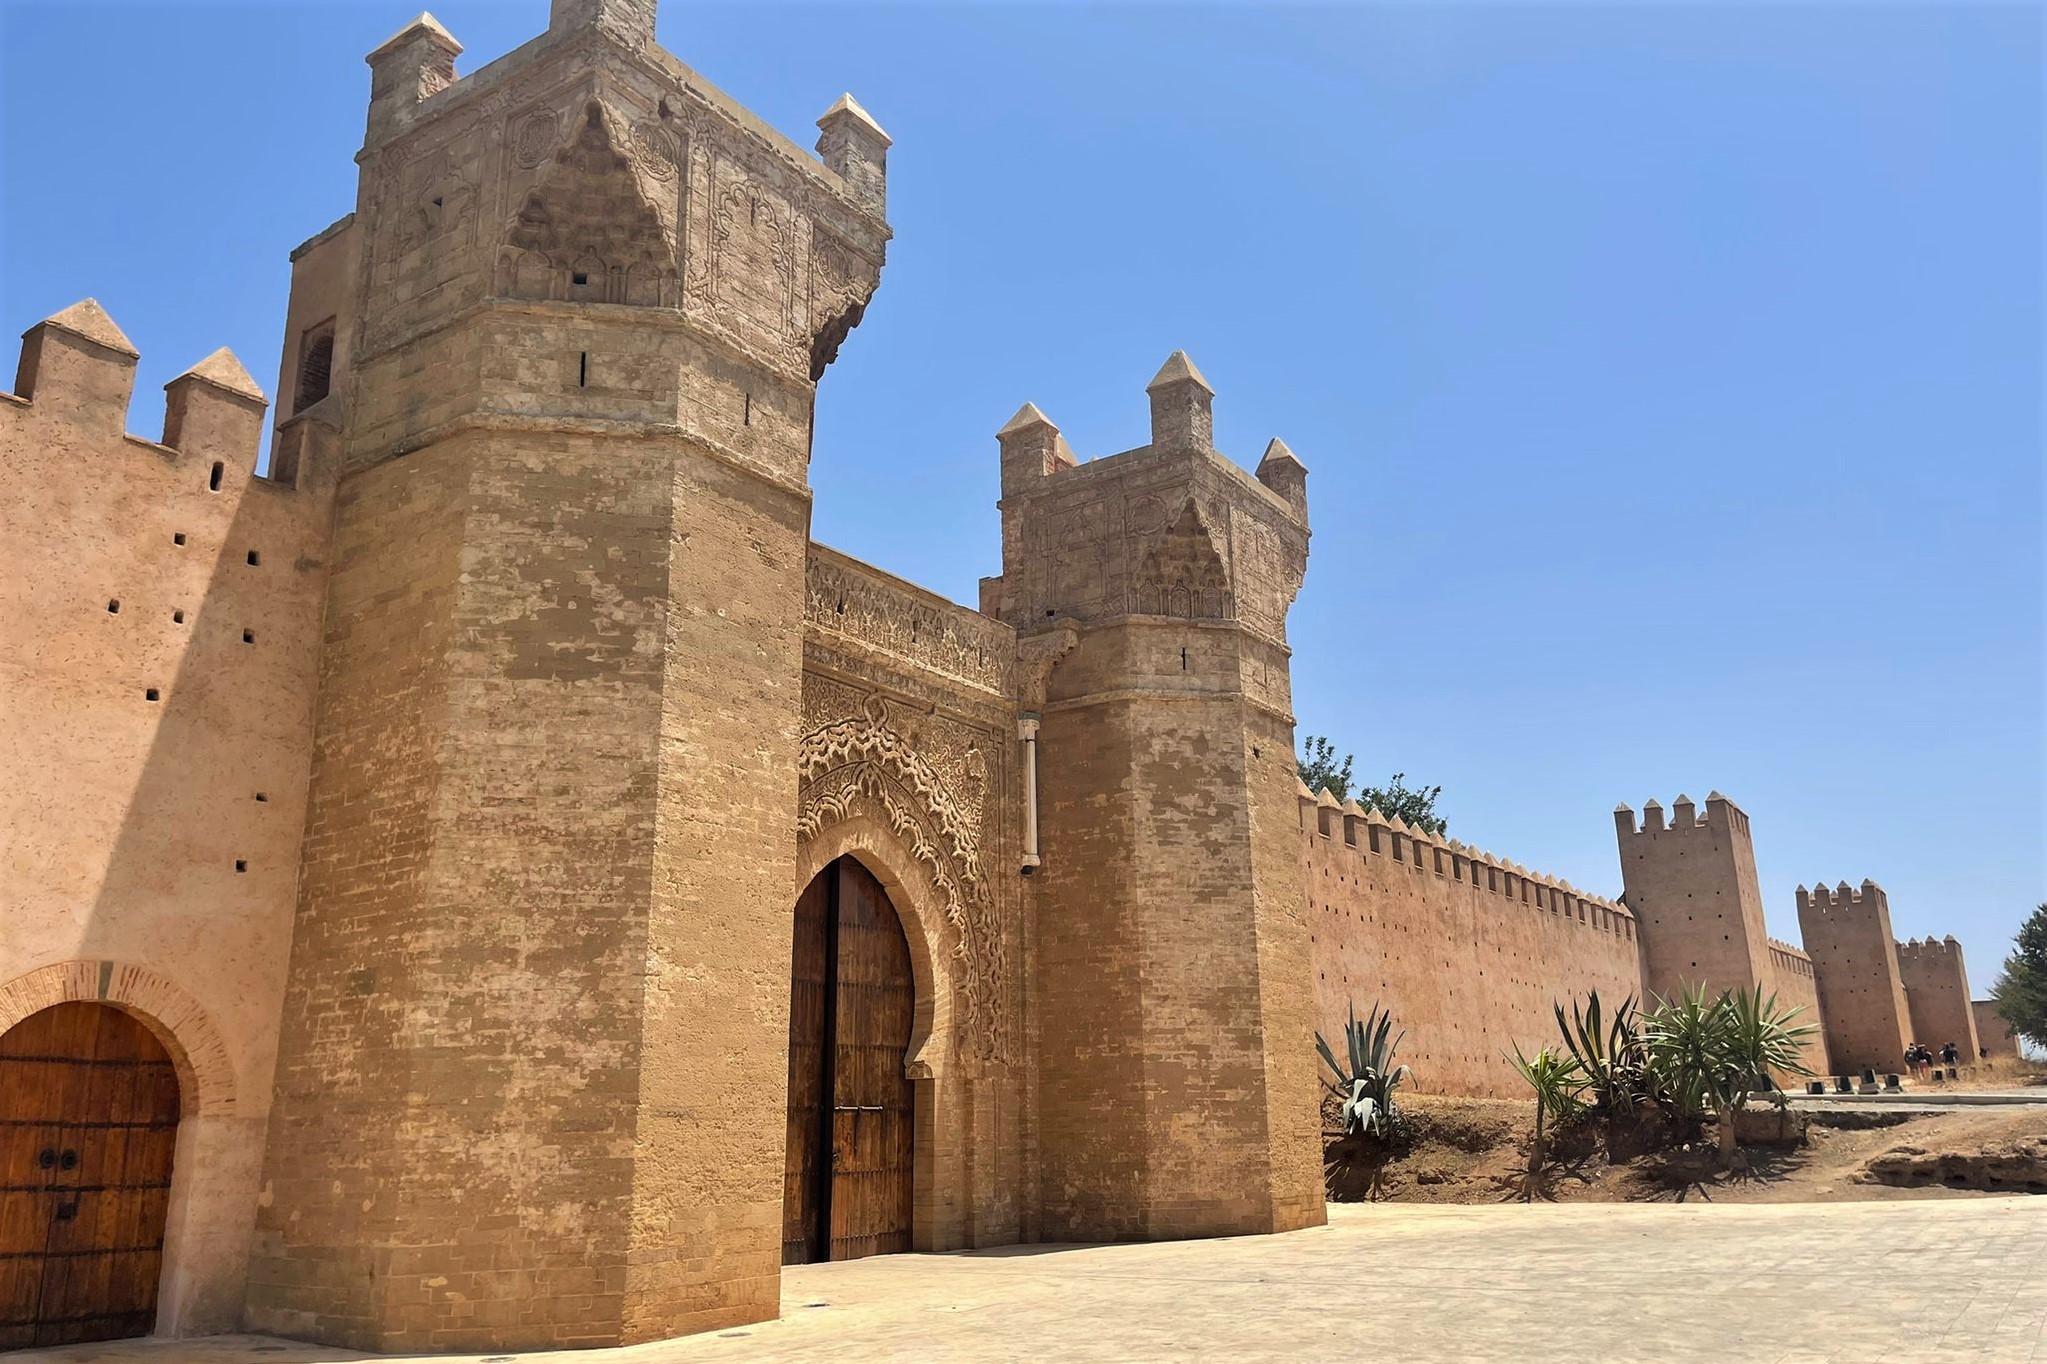 Morocco imperial cities tour started from rabat